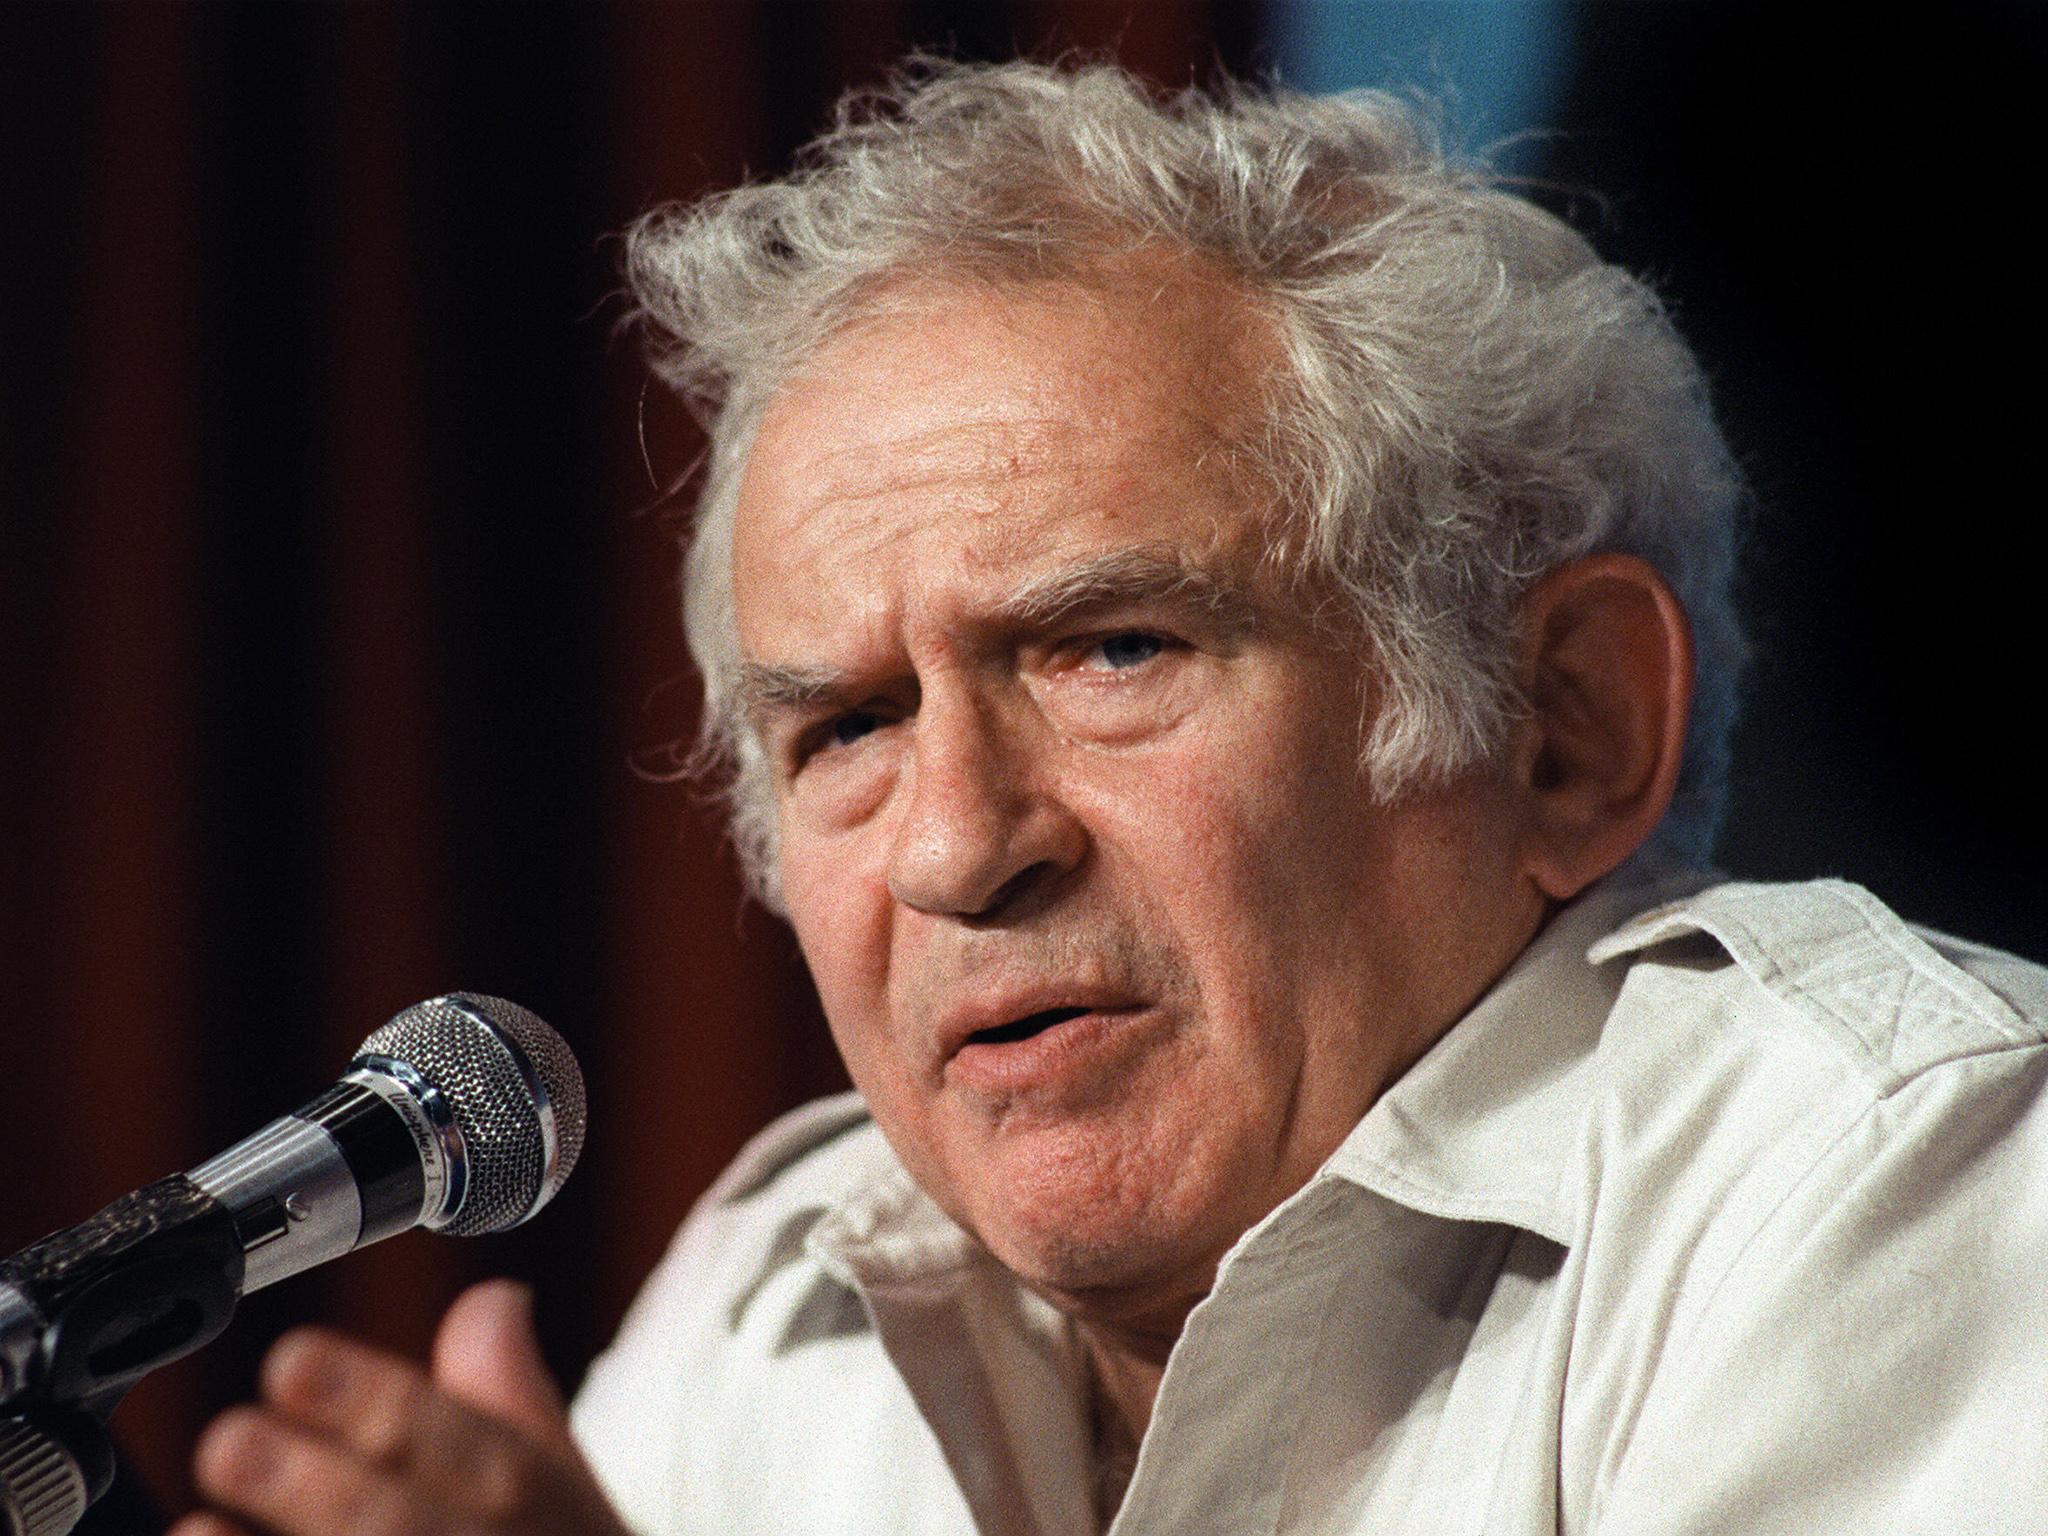 Norman Mailer ‘has written no indisputable book,’ says Bloom. ‘He is the author of Norman Mailer’